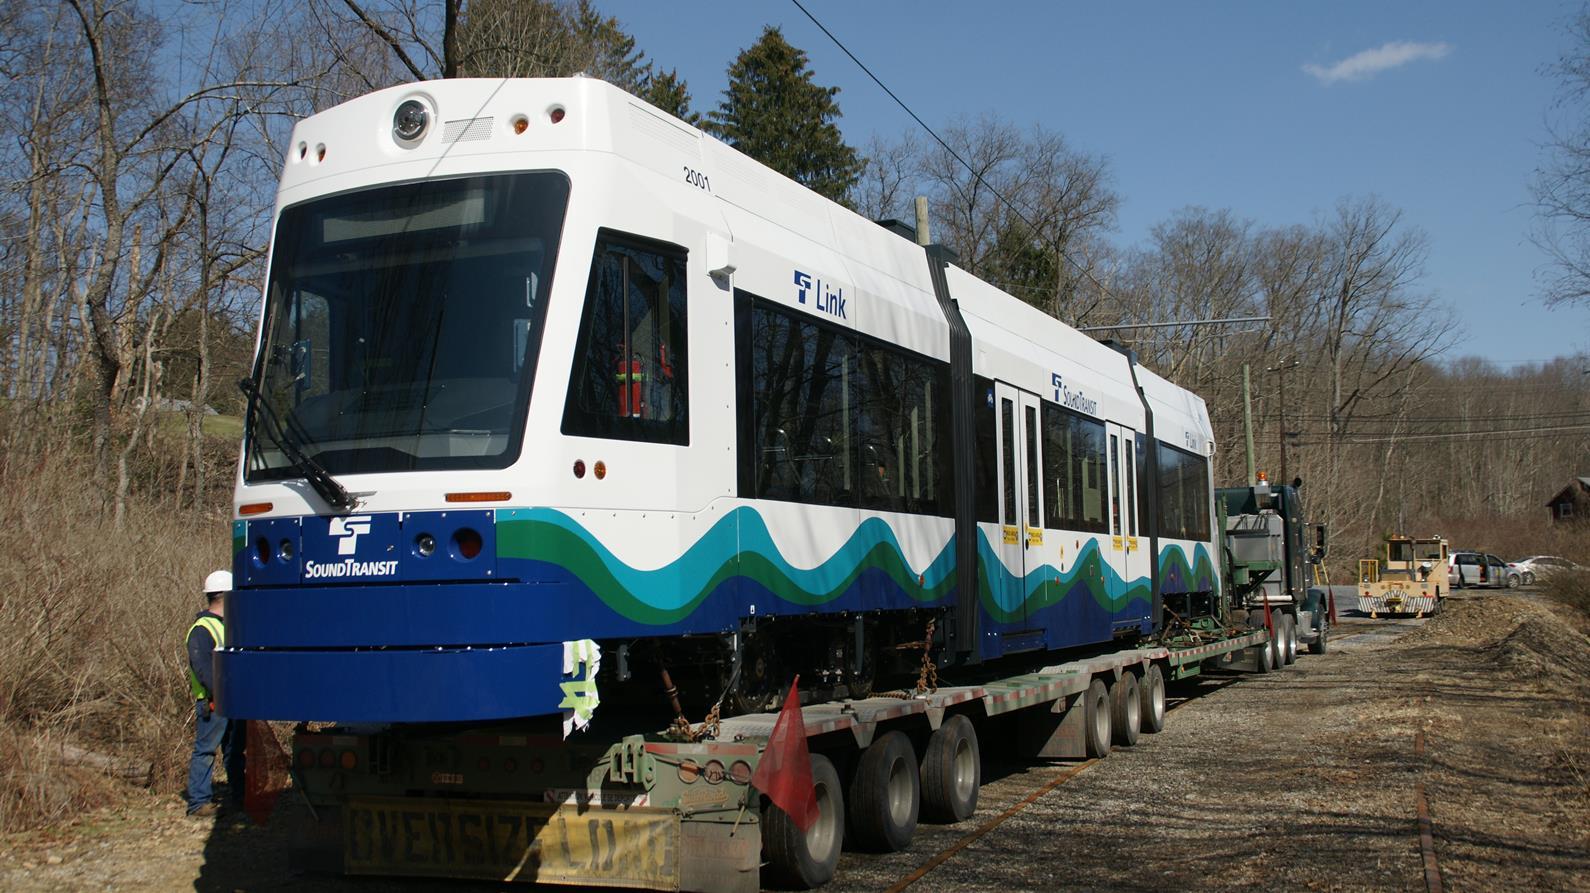 First Liberty NXT tram delivery to Tacoma